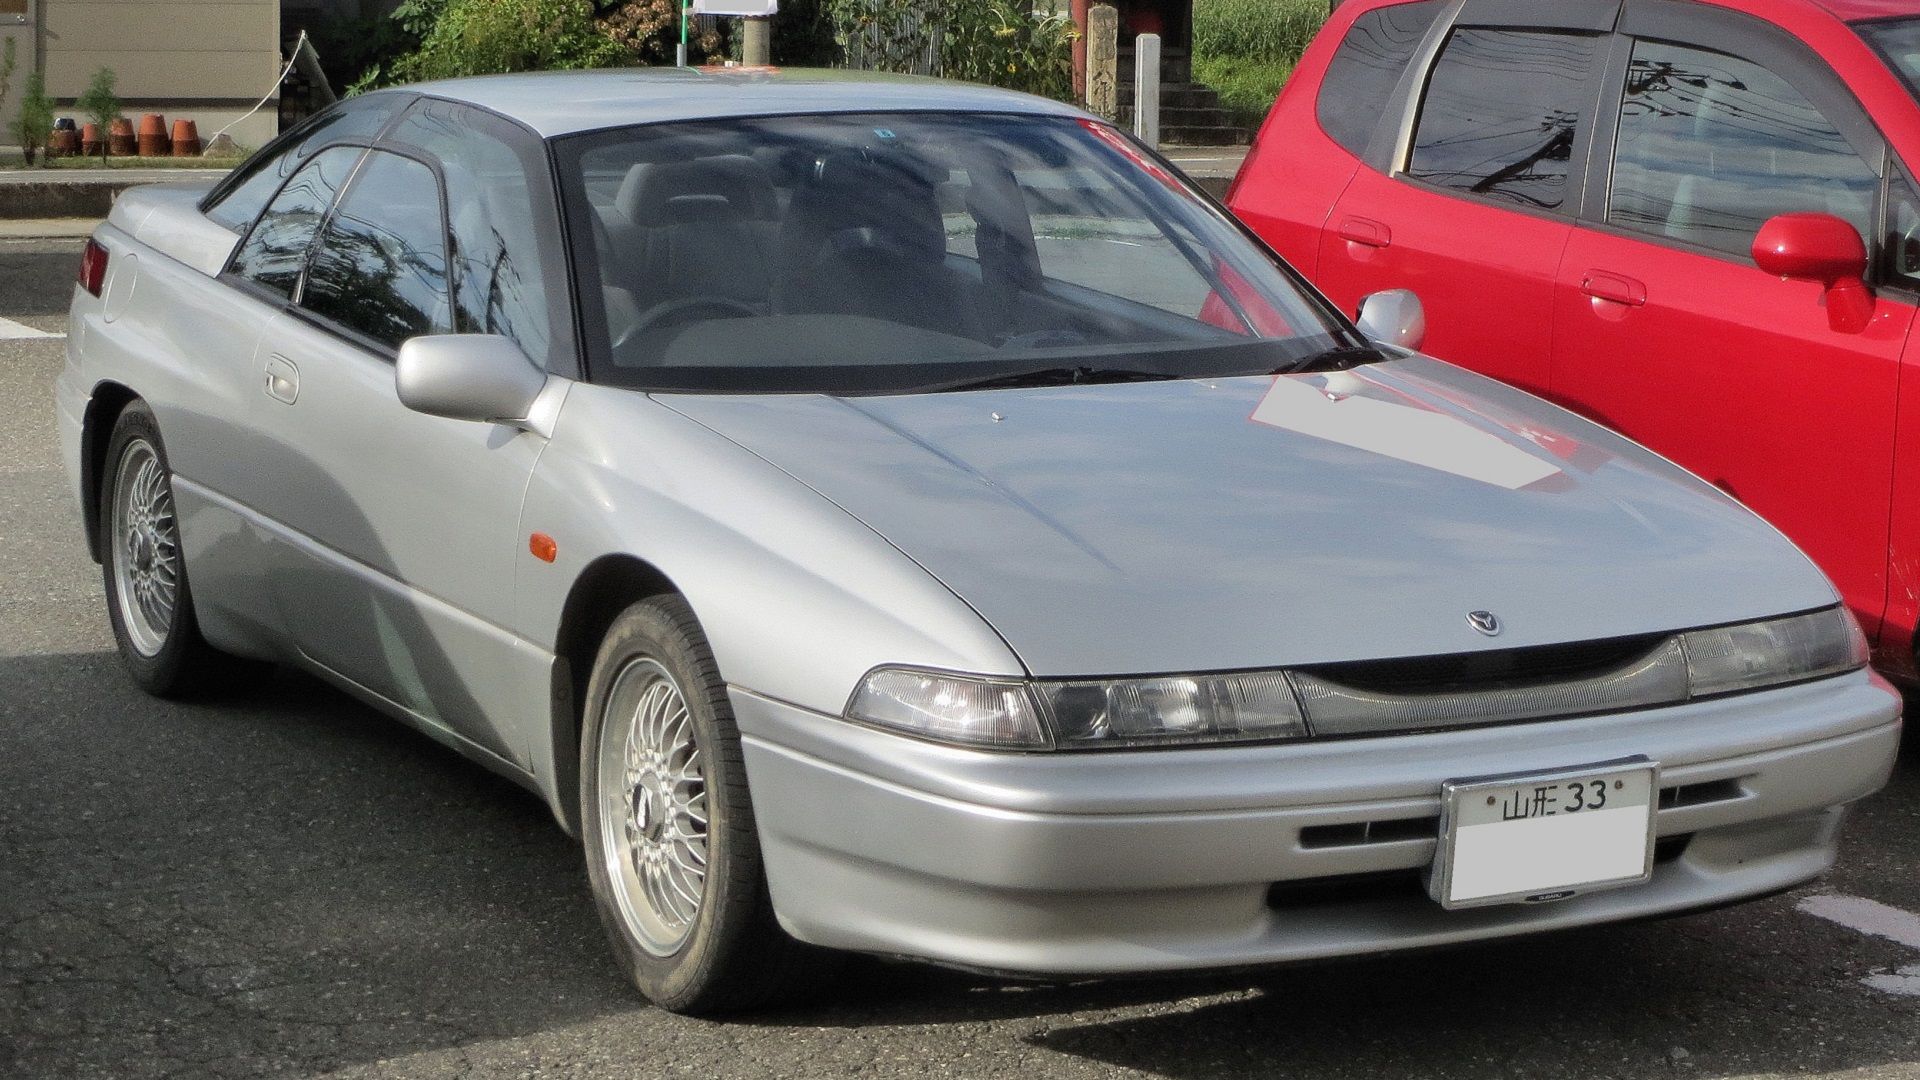 Silver Subaru SVX in parking lot from the front